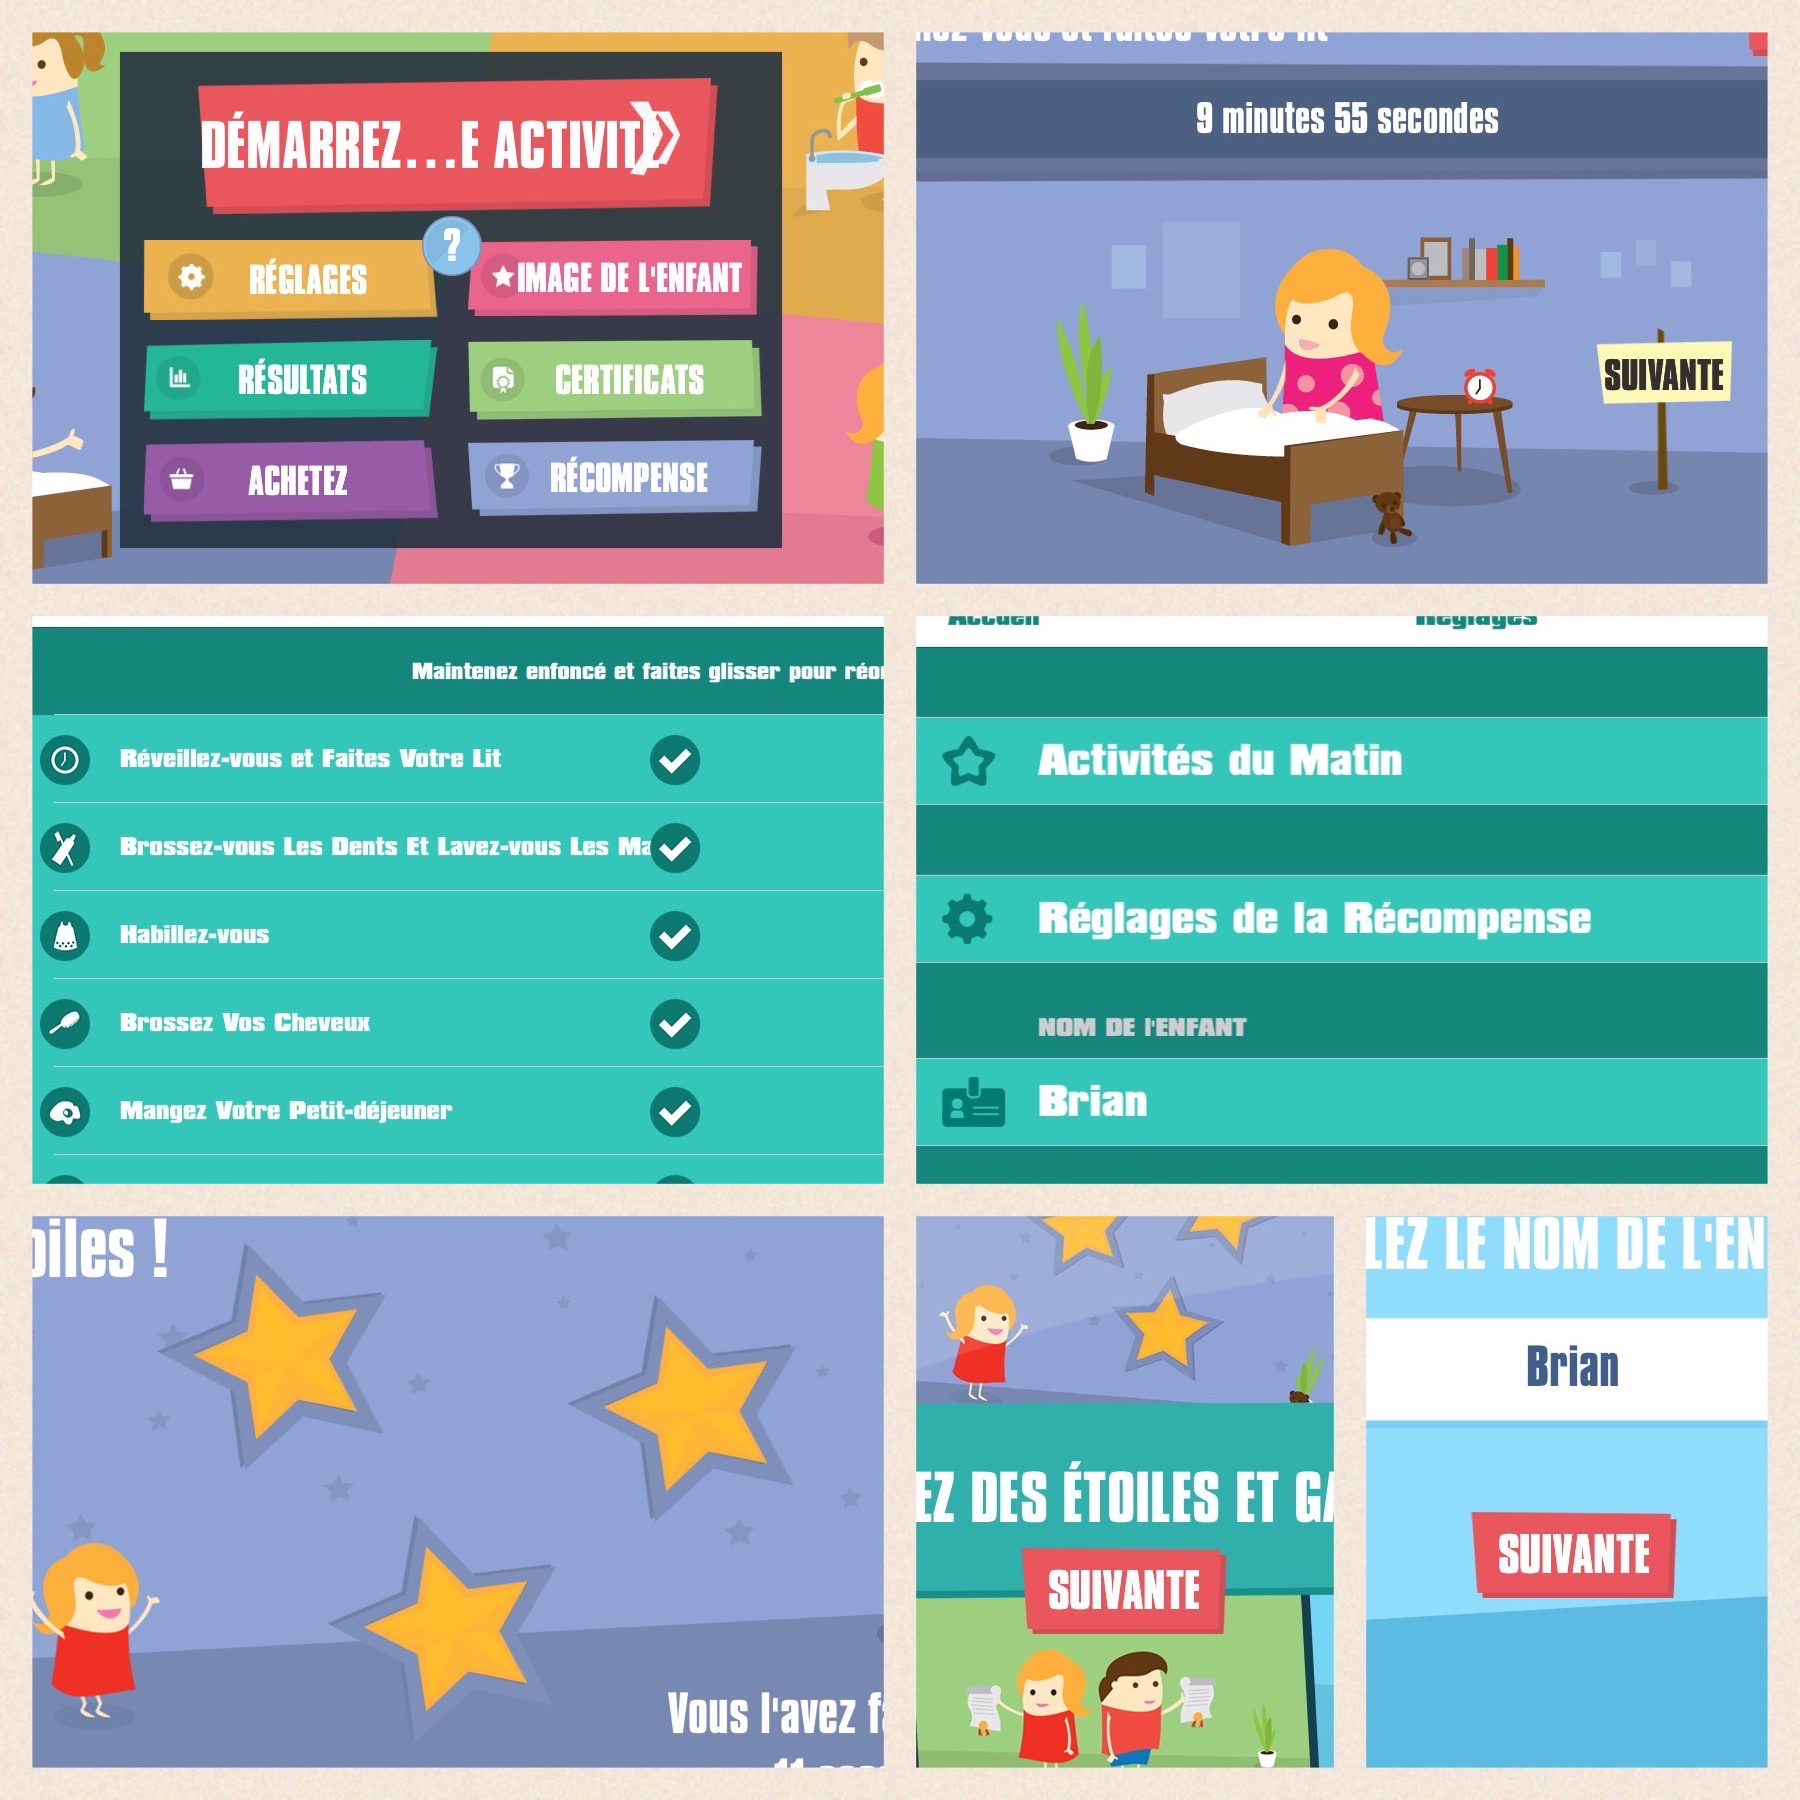 Timers y planning - HOPTOYS